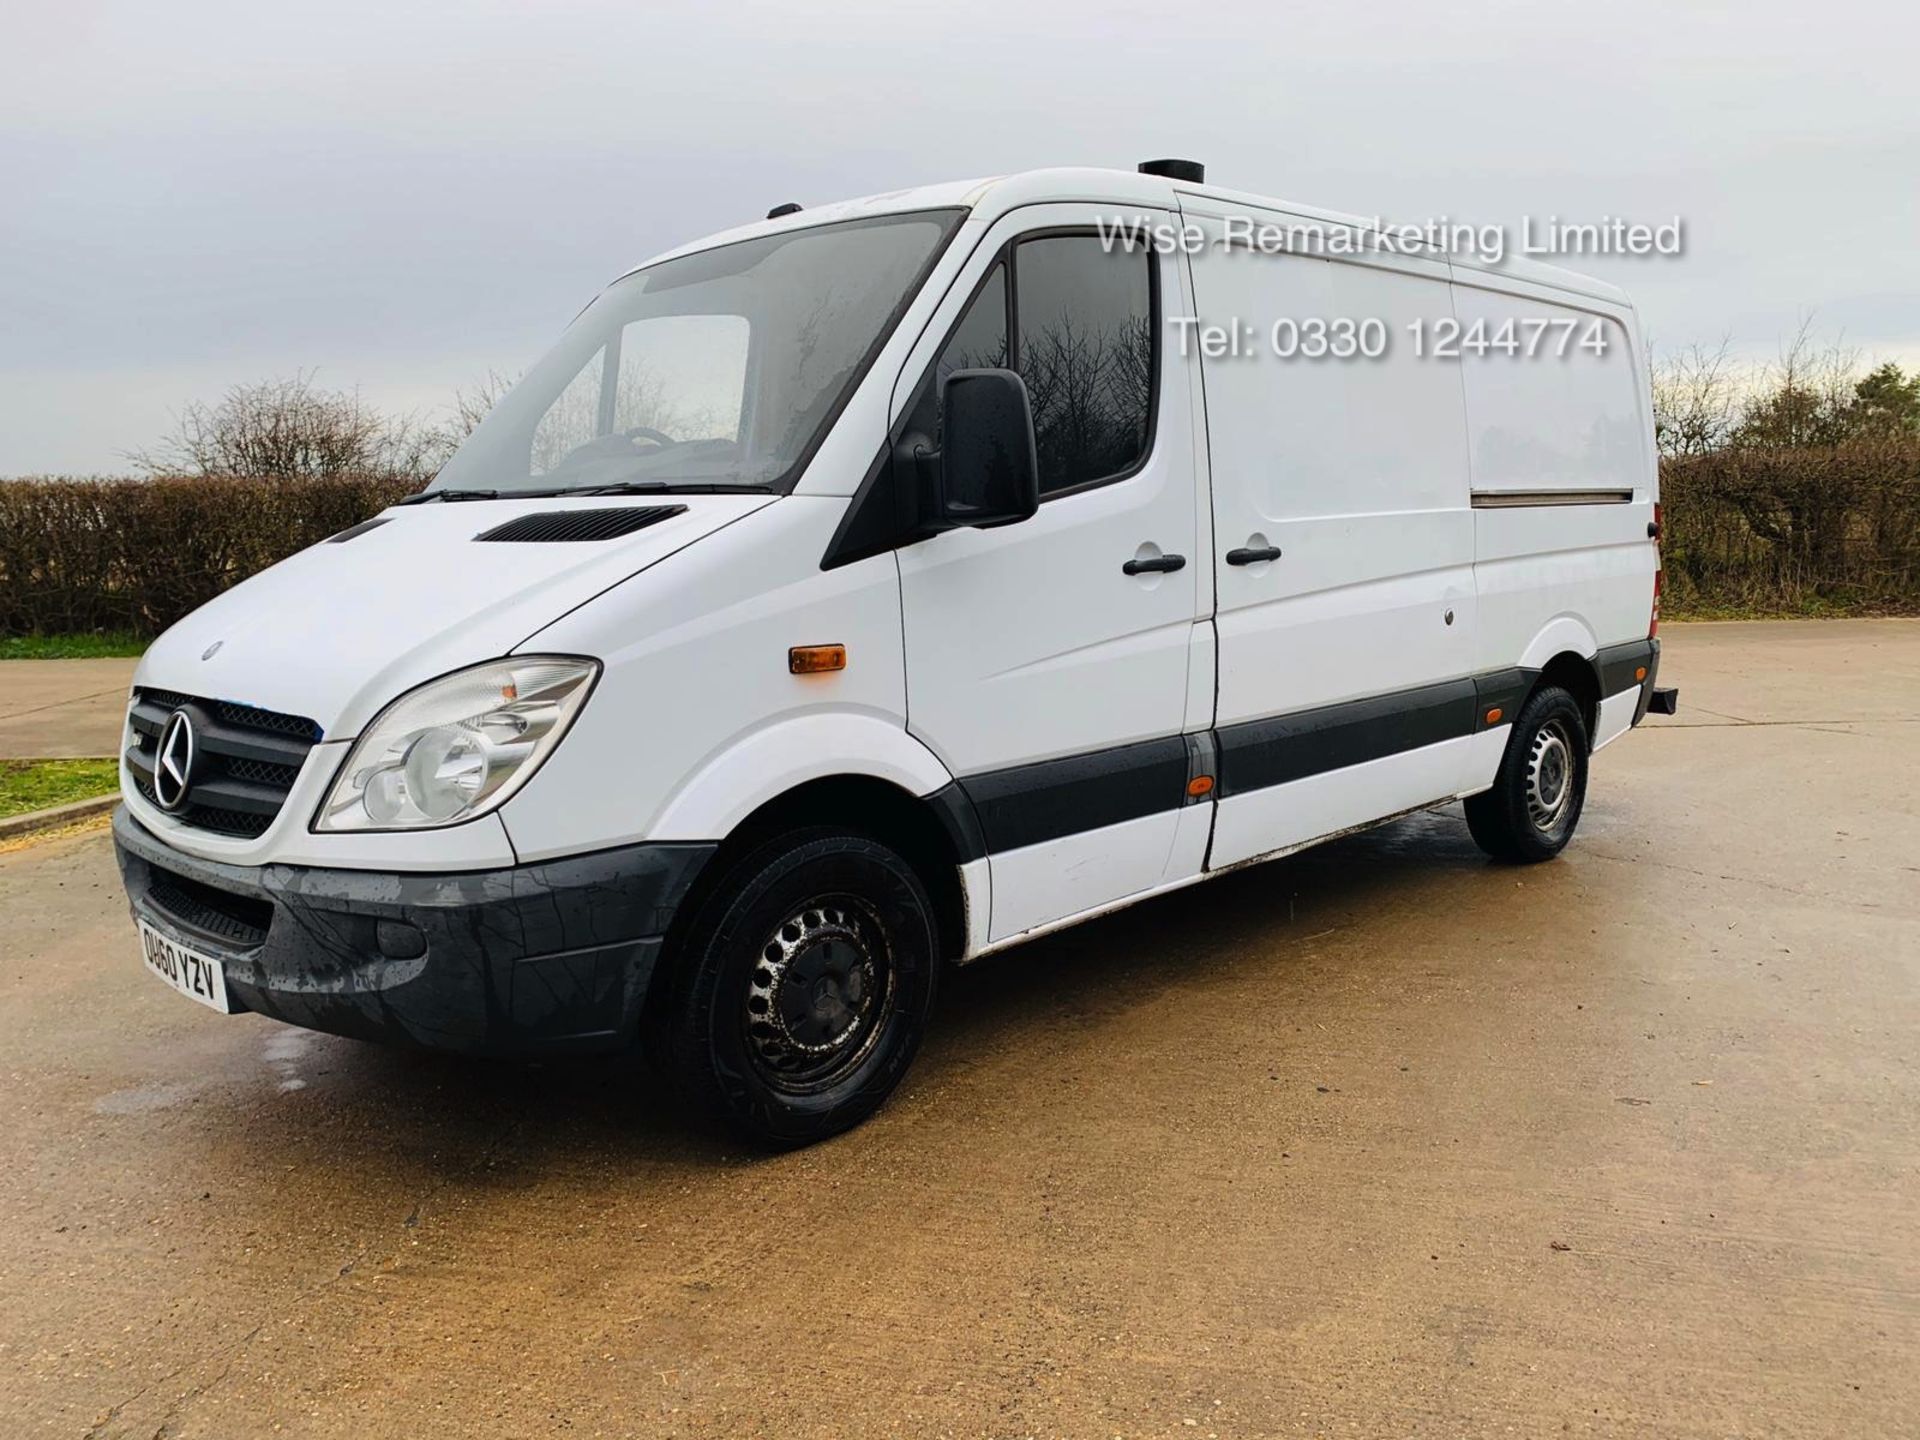 Mercedes Sprinter 313 2.1 CDI *Automatic Triptronic Gearbox* - 2011 Model - Ply Lined